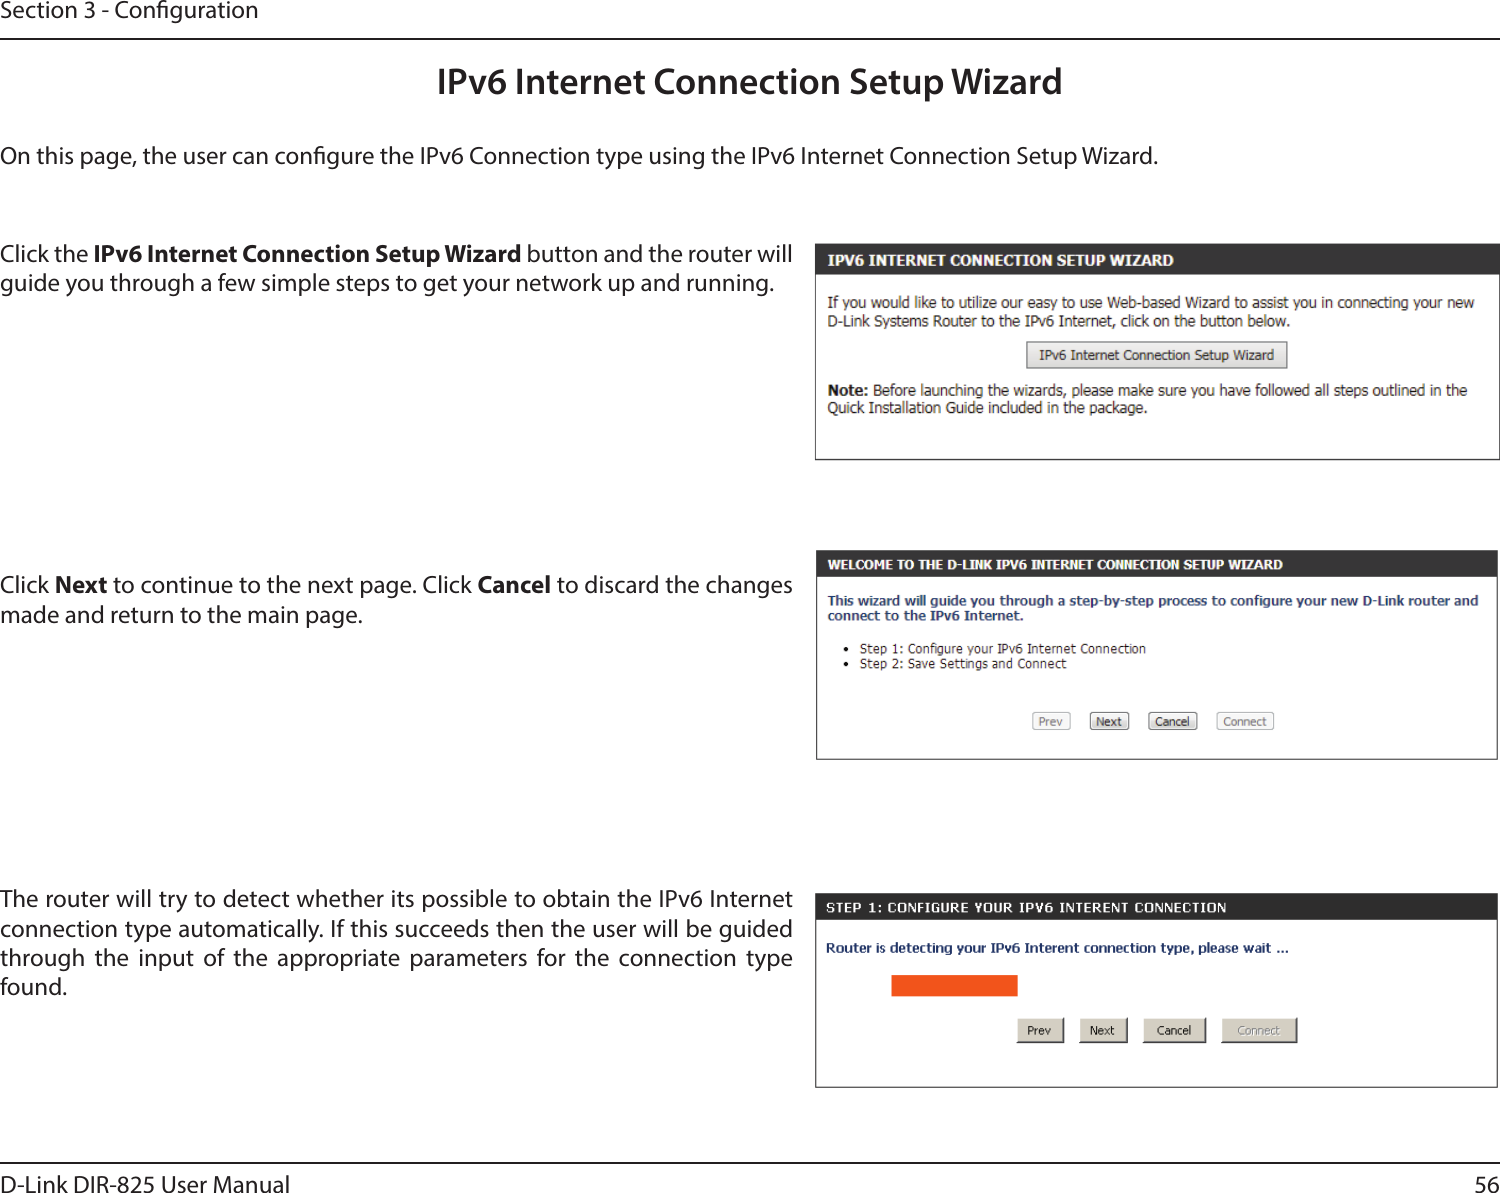 56D-Link DIR-825 User ManualSection 3 - CongurationIPv6 Internet Connection Setup WizardOn this page, the user can congure the IPv6 Connection type using the IPv6 Internet Connection Setup Wizard.Click the IPv6 Internet Connection Setup Wizard button and the router will guide you through a few simple steps to get your network up and running.Click Next to continue to the next page. Click Cancel to discard the changes made and return to the main page.The router will try to detect whether its possible to obtain the IPv6 Internet connection type automatically. If this succeeds then the user will be guided through the input of the appropriate parameters for the connection type found.